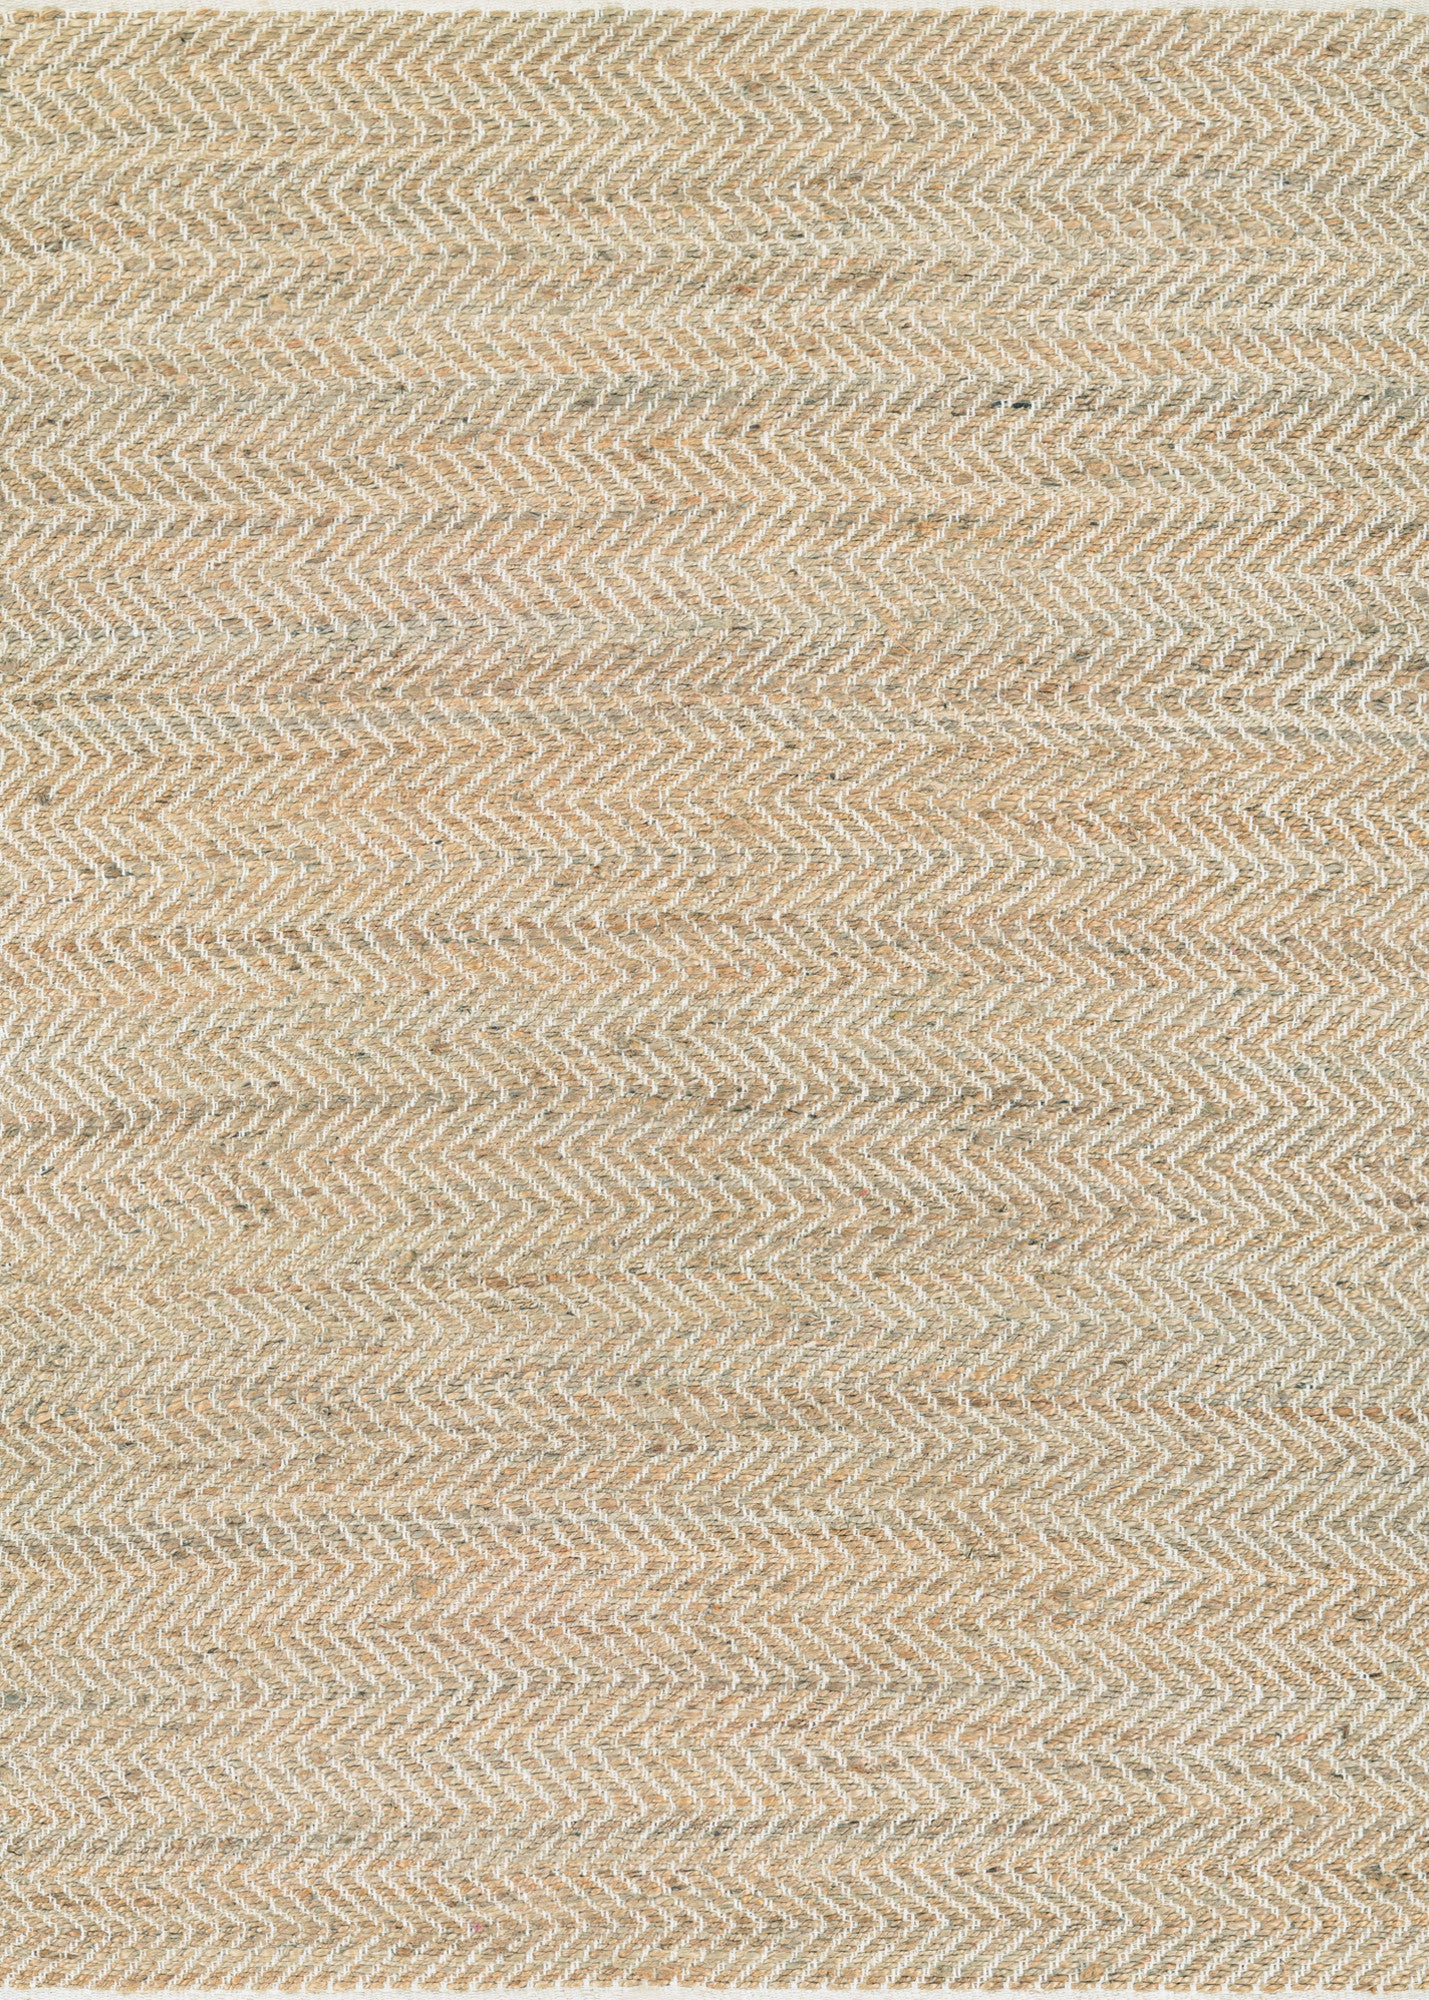 Couristan Nature's Elements Gravity Natural/Tan Area Rug